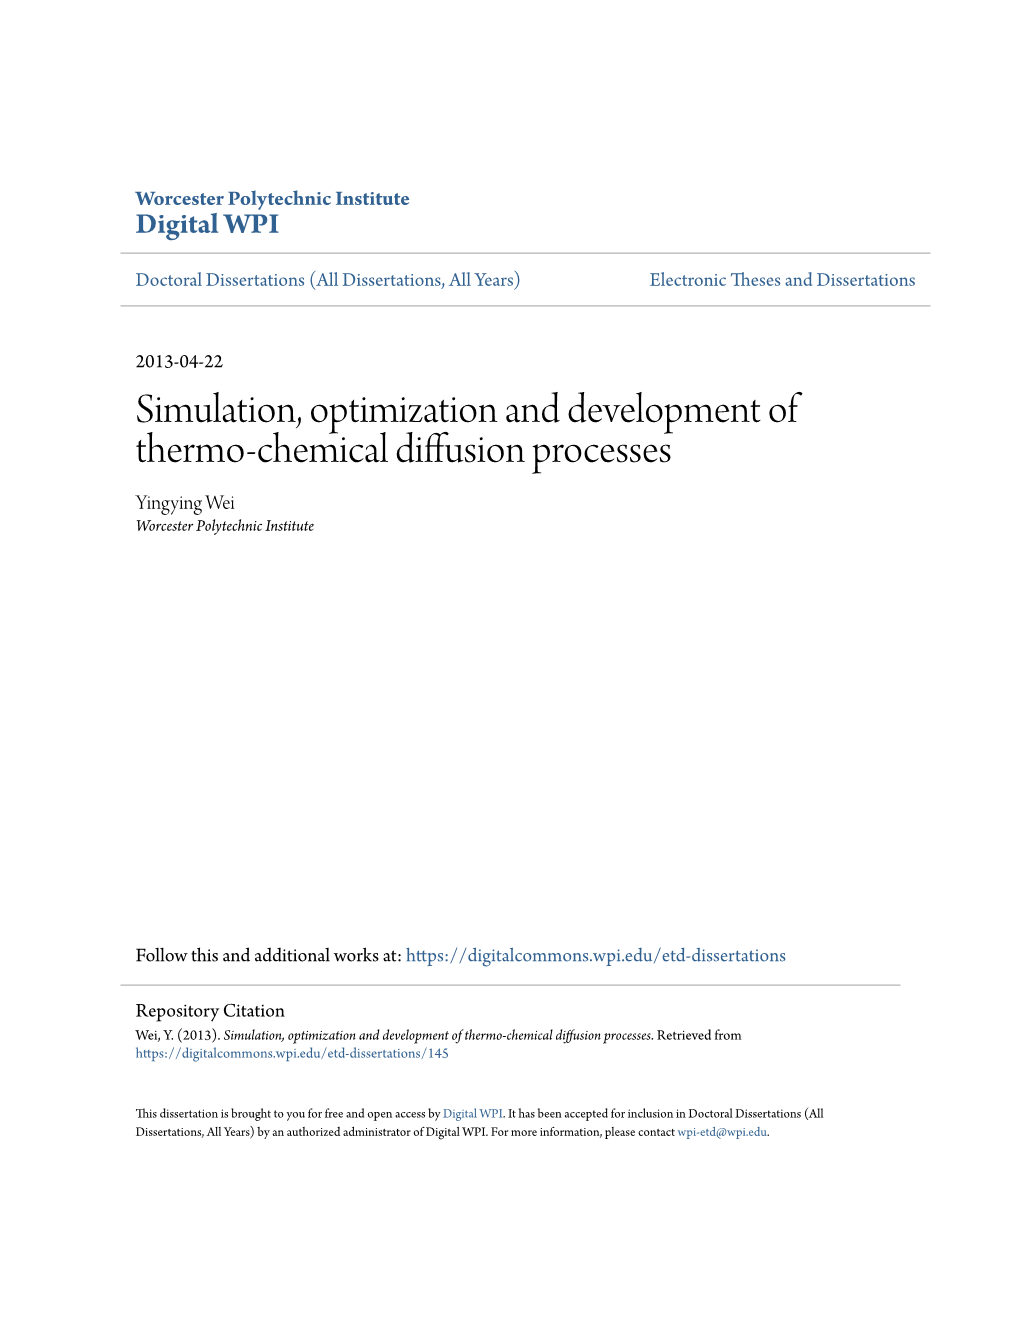 Simulation, Optimization and Development of Thermo-Chemical Diffusion Processes Yingying Wei Worcester Polytechnic Institute